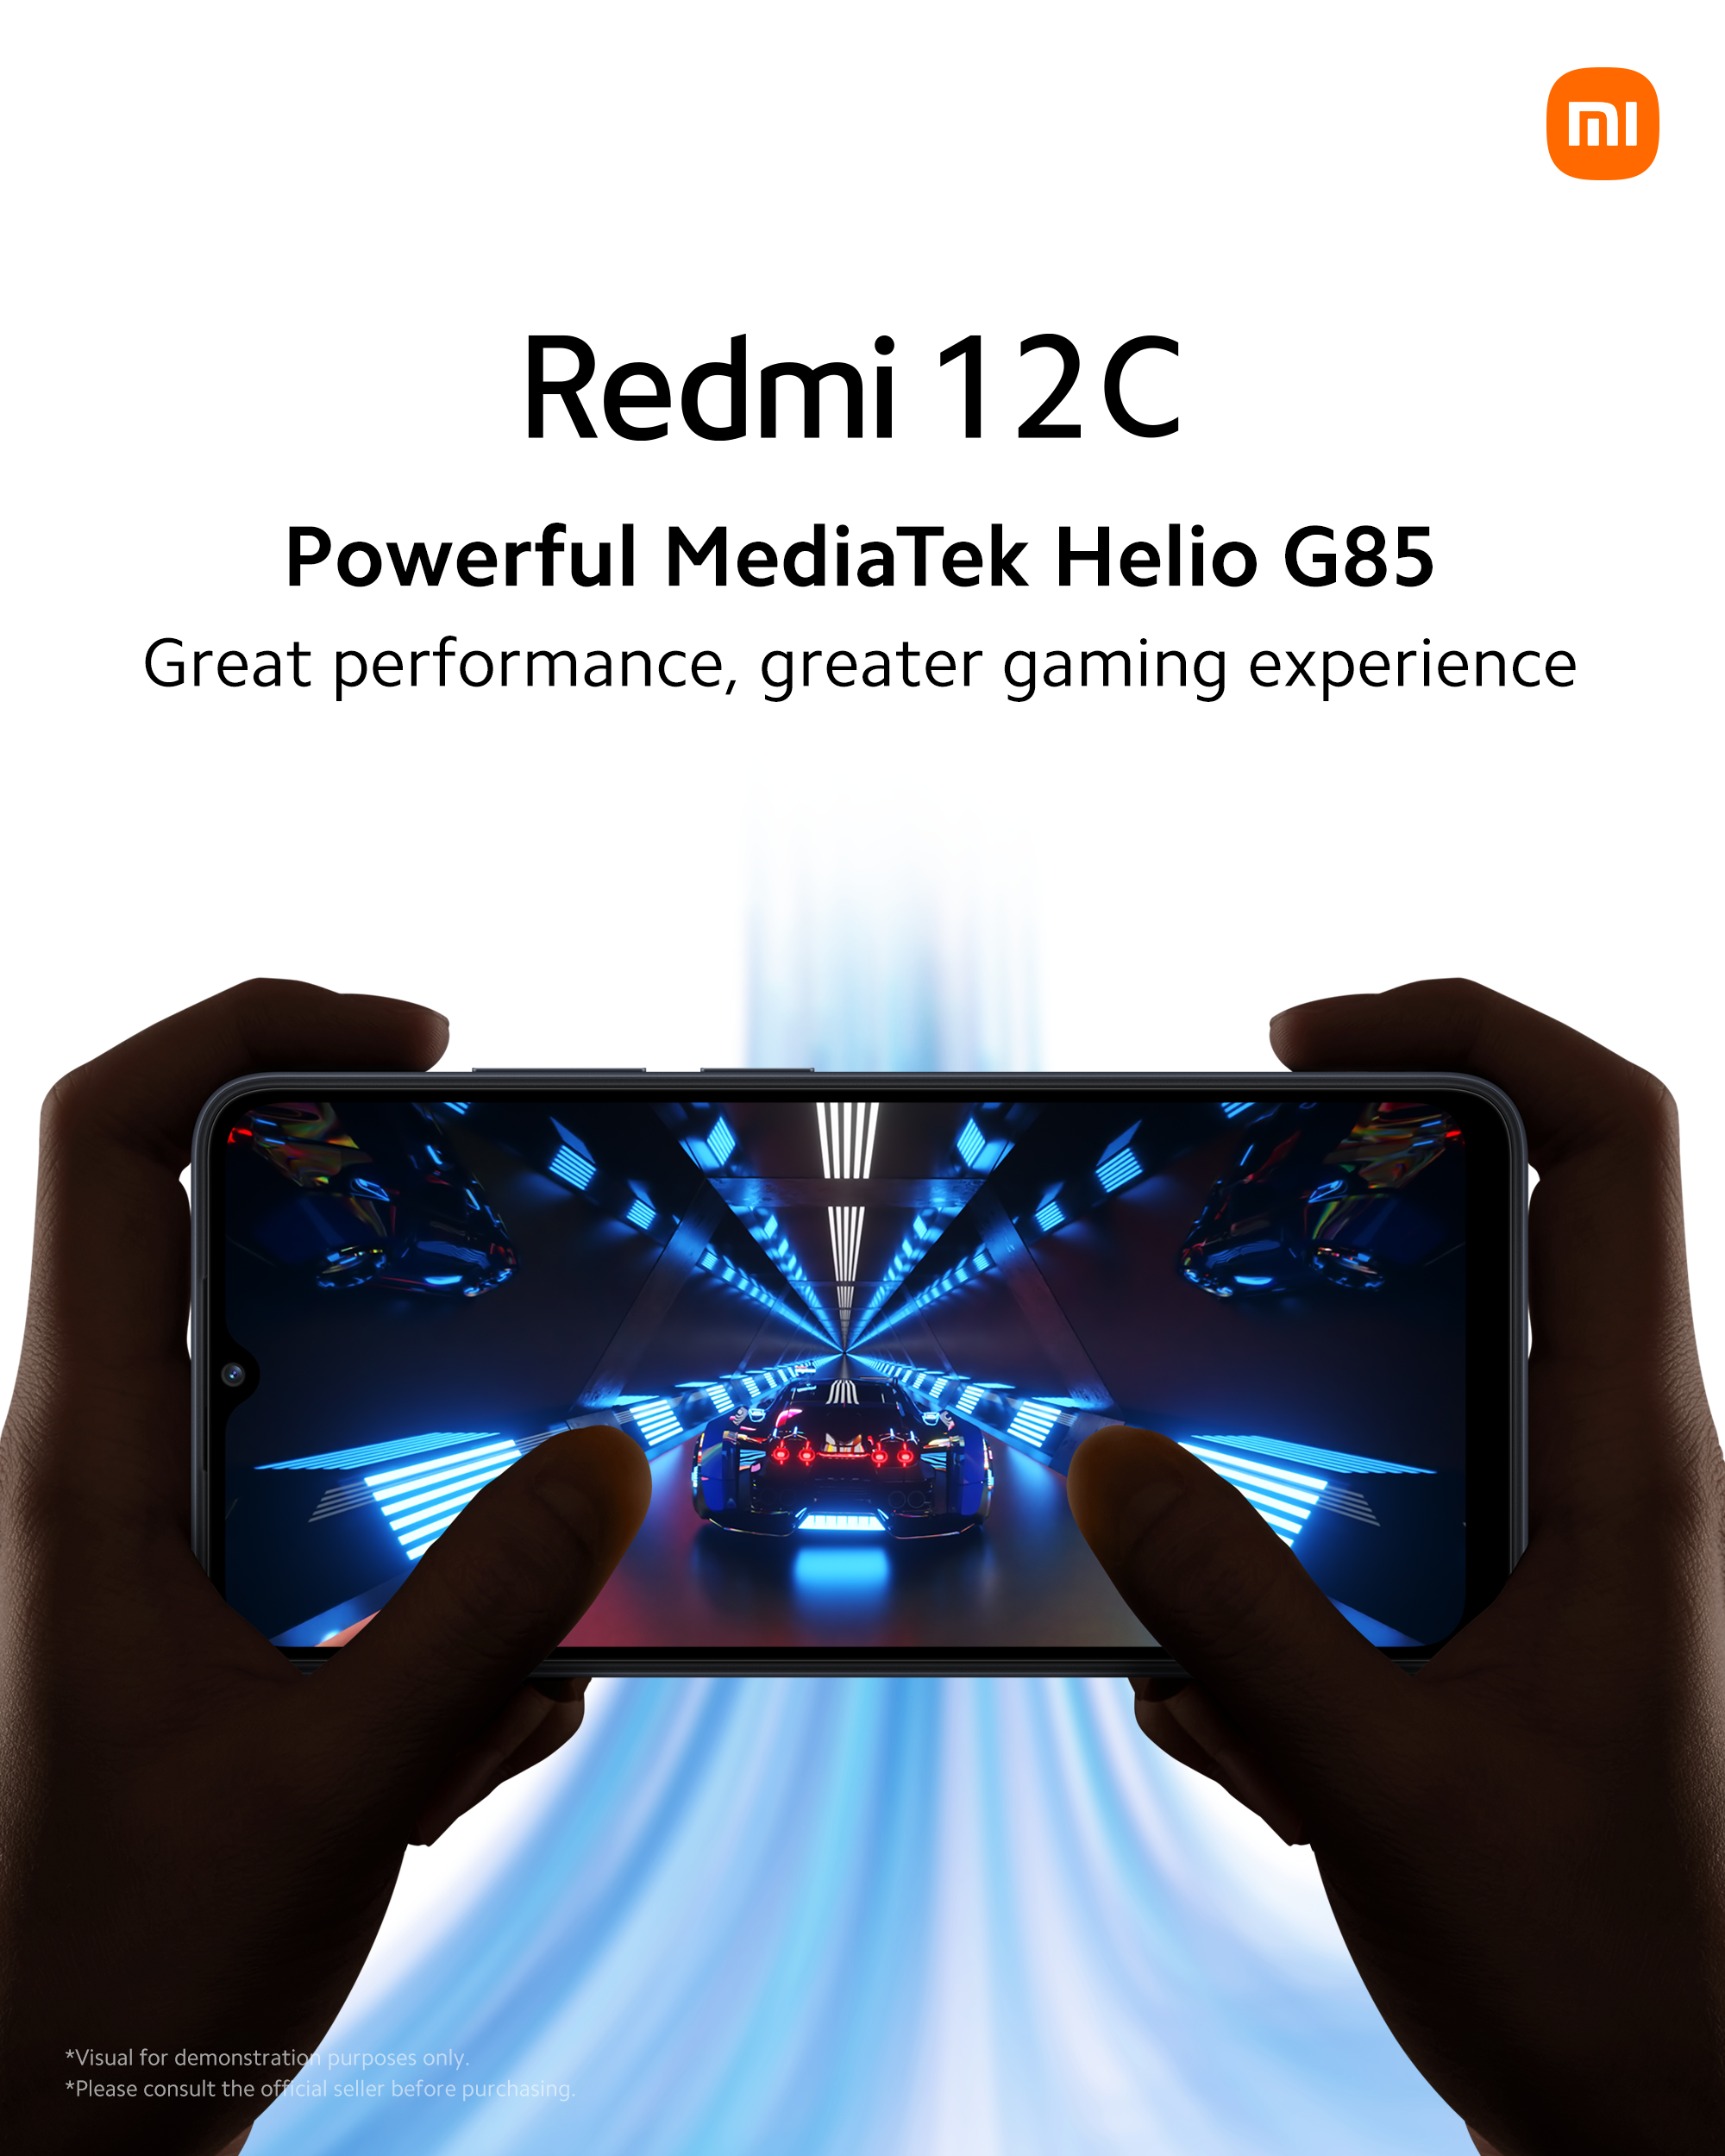 Redmi 12C: The Ultimate Entry-Level Smartphone for Every Need